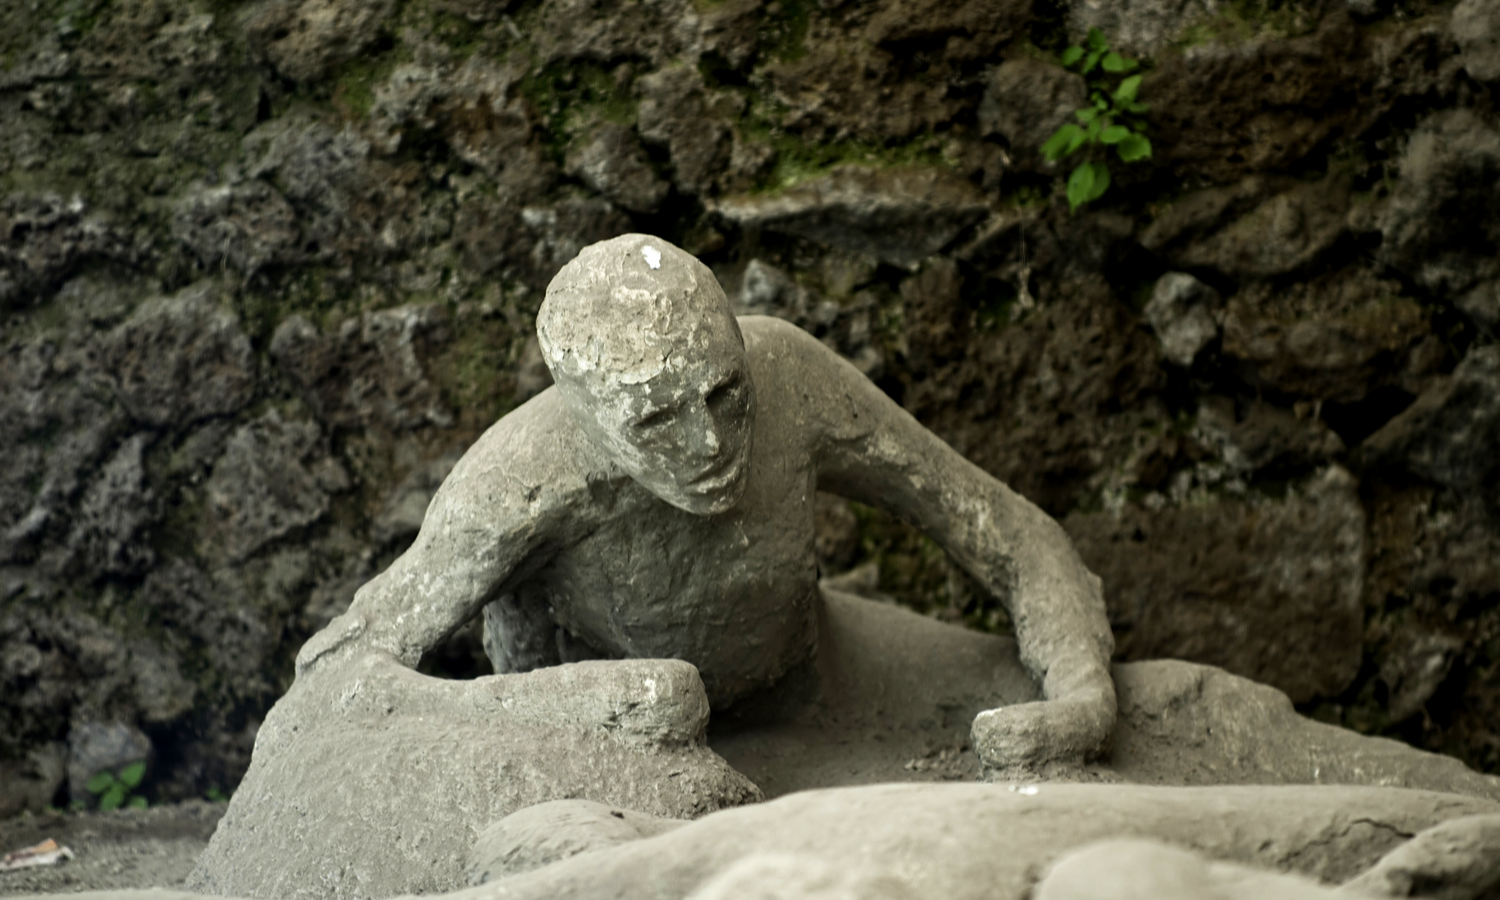 Picture of a 'petrified' Pompeii victim. Plaster was poured into the hollow spaces in the ground and produced casts of the victim's bodies. This cast depicts someone trying to climb away with horror depicted on it's face.